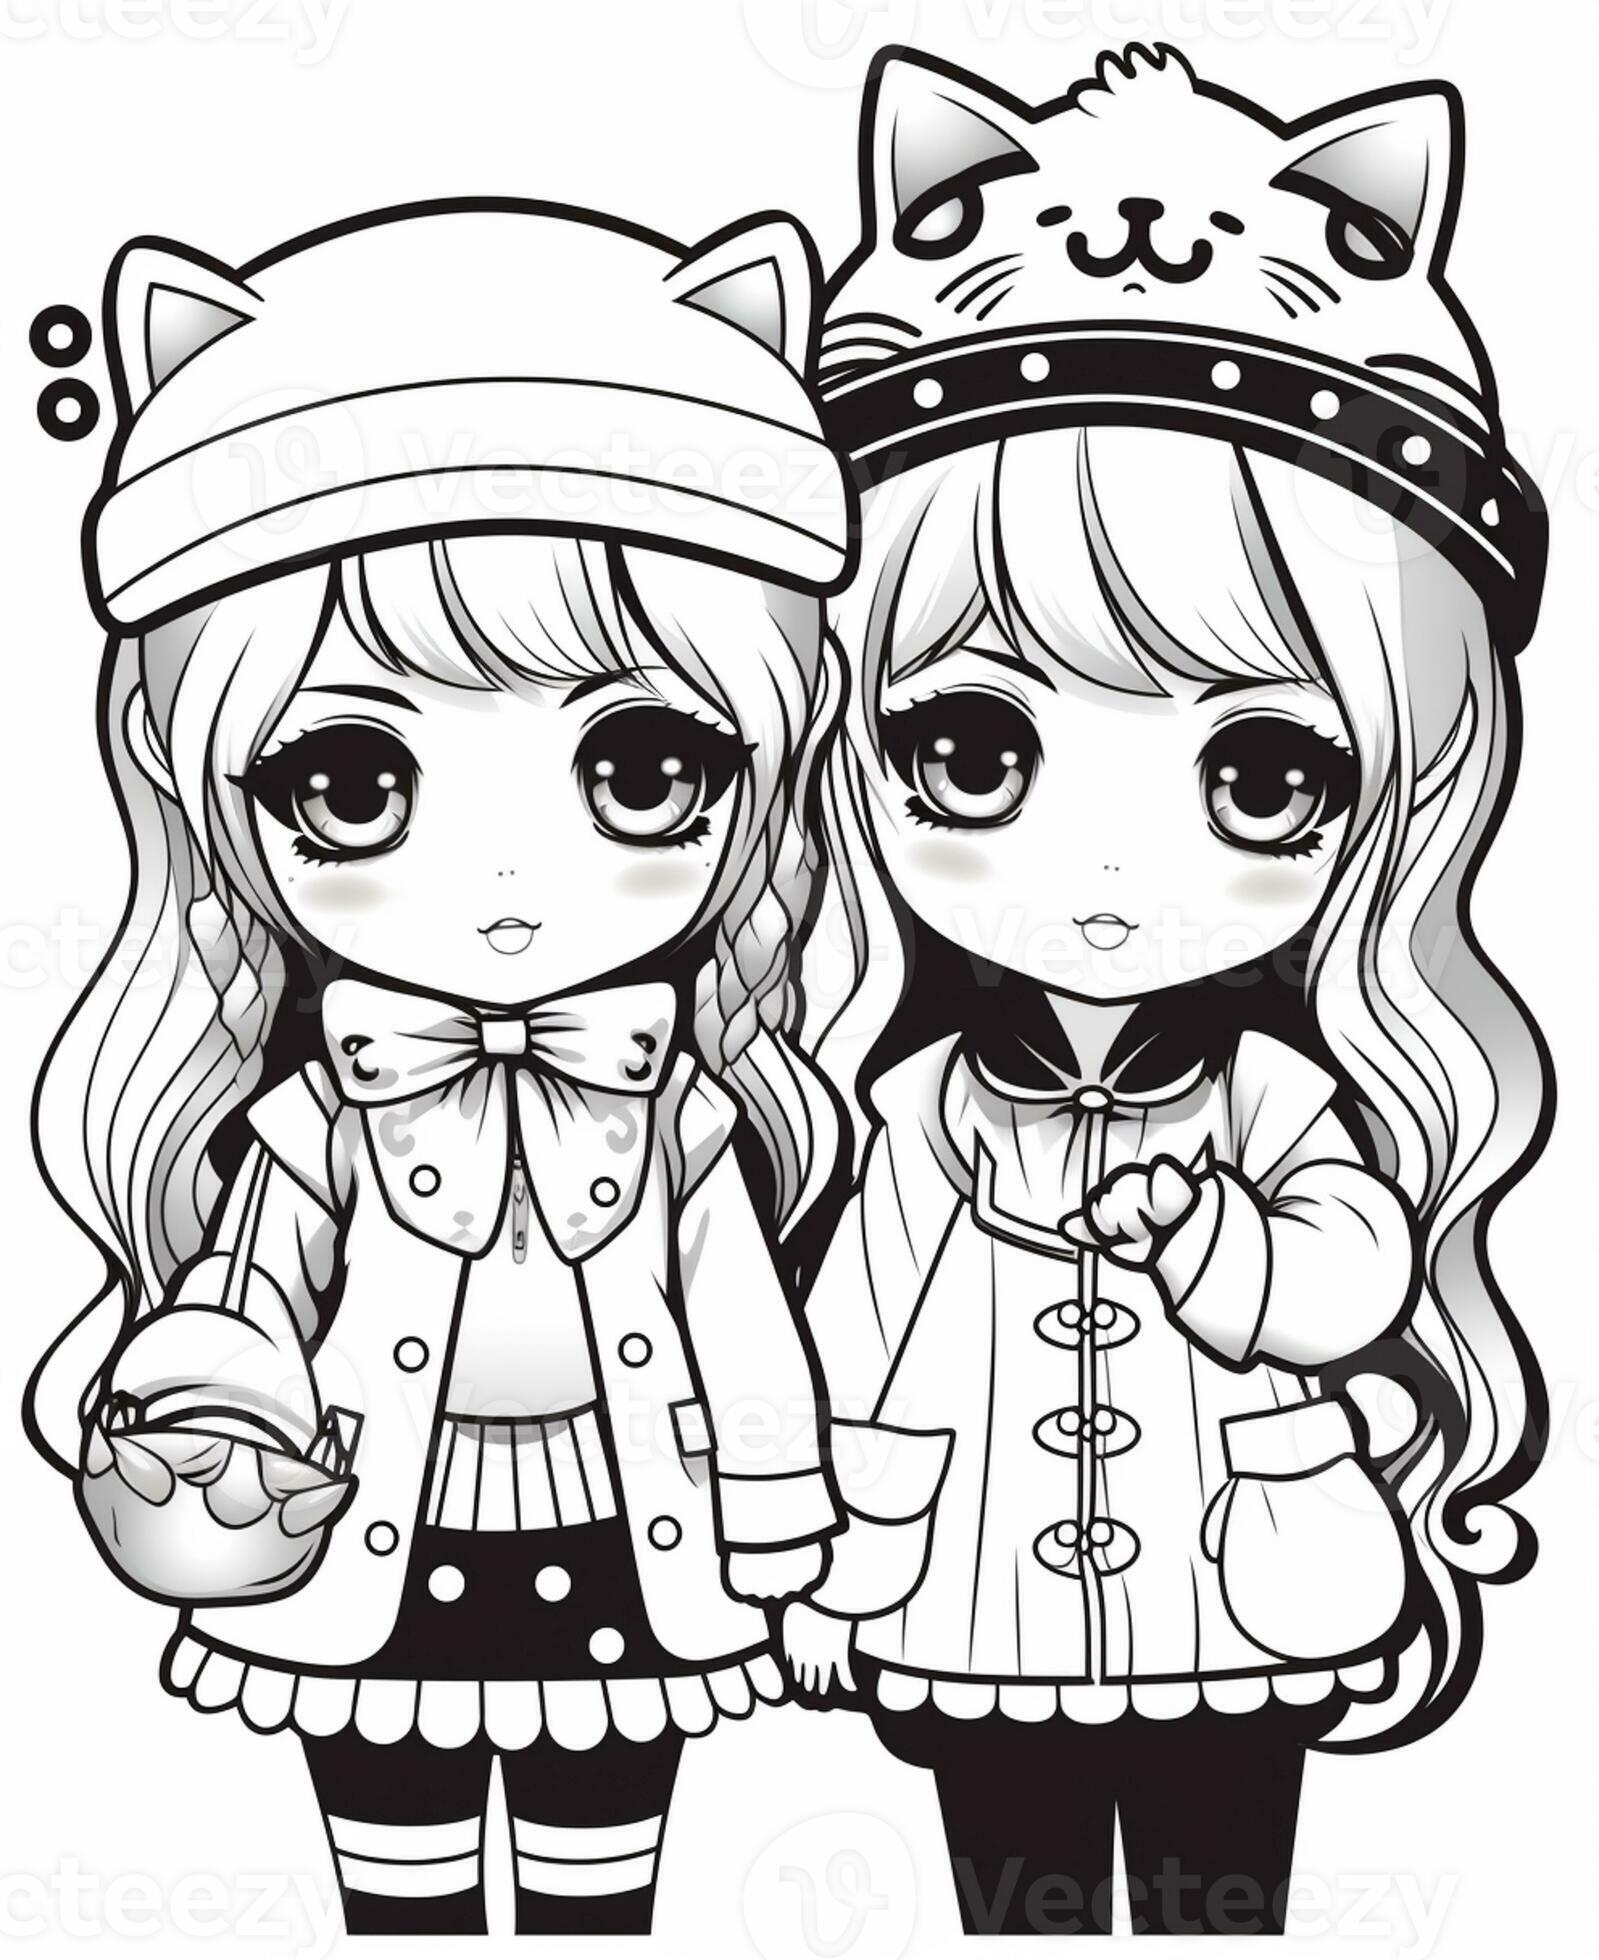 two anime girls with hats and coats standing next to each other ...